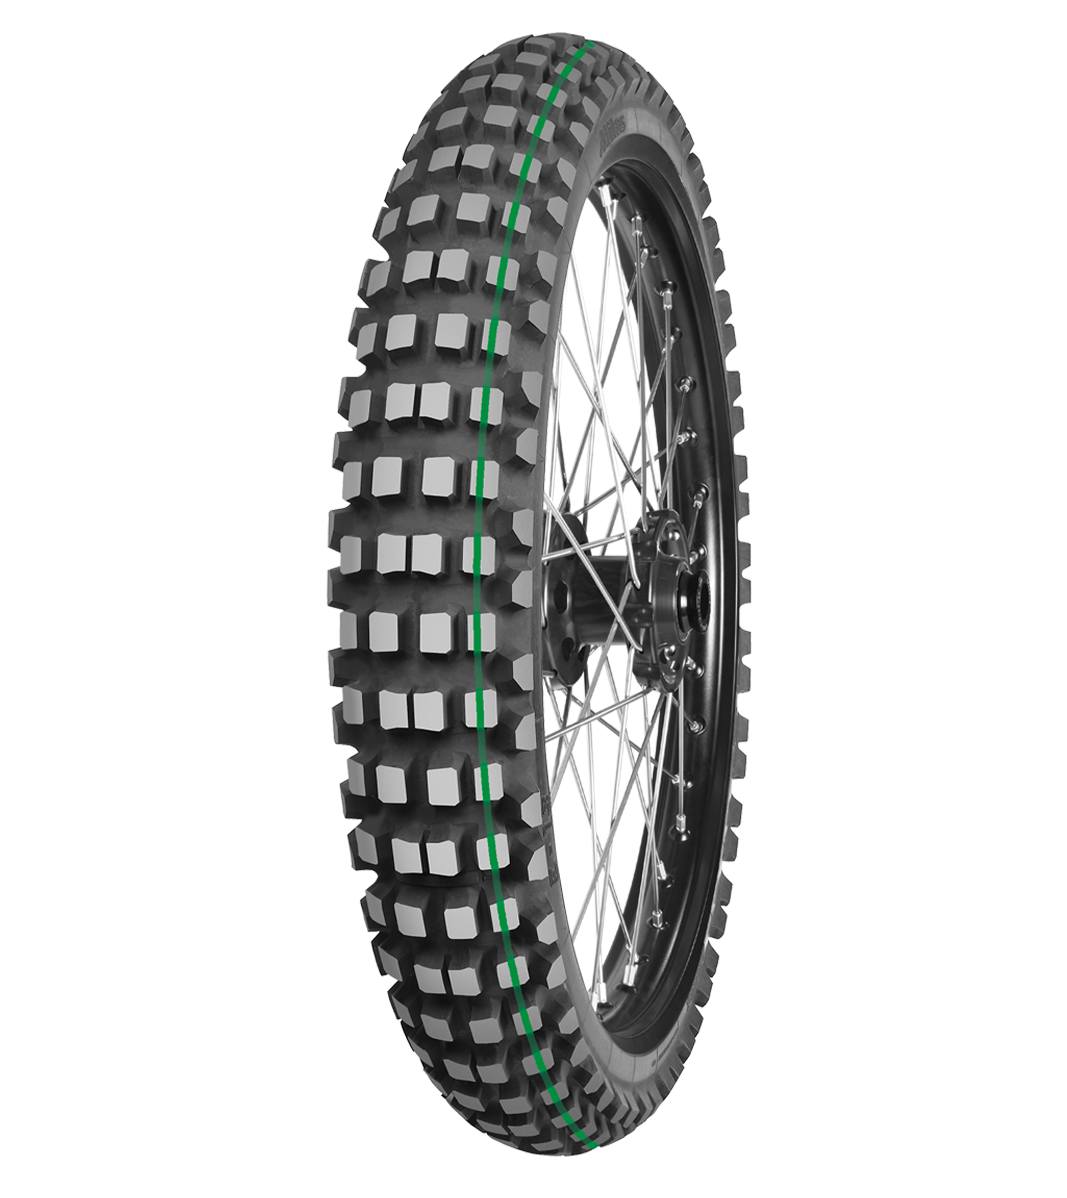 Mitas E-13 Rally Star 90/90-21 Rally Off-Road 54R Green Tube Front Tire, 224621, 90/90-21, Adventure Touring, E Series, E-13 Rally Star, Off-Road, Rally, Rear, Tires - Imported and distributed in North &amp; South America by Lindeco Genuine Powersports - Premier Powersports Equipment and Accessories for Motorcycle Enthusiasts, Professional Riders and Dealers.